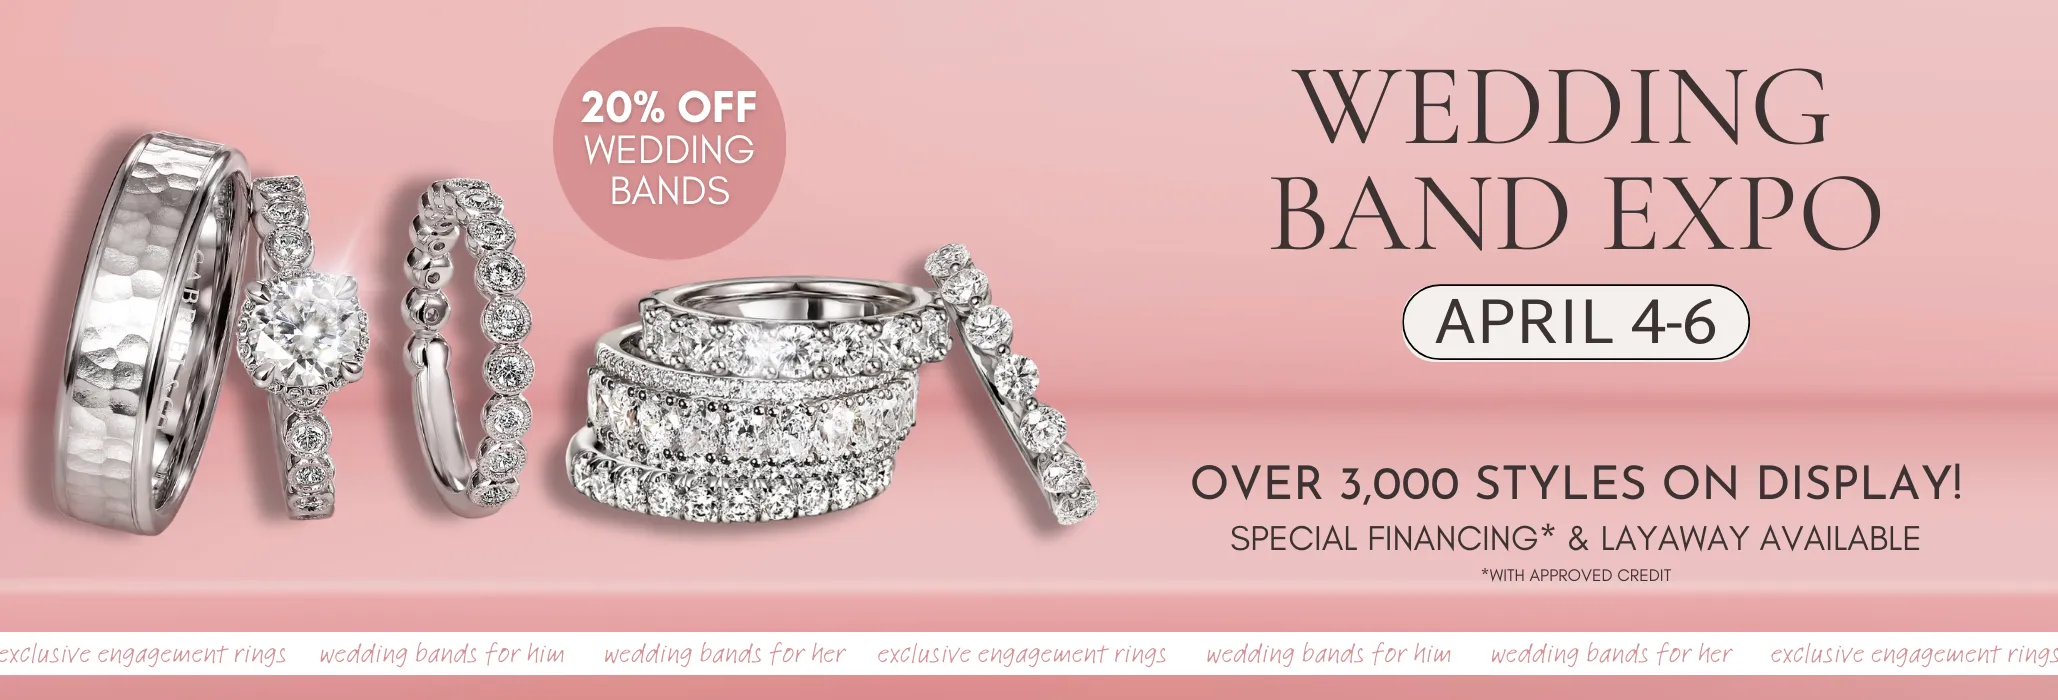 Wedding Band Expo at Harris Jeweler Troy, OH. Save 20% on wedding bands